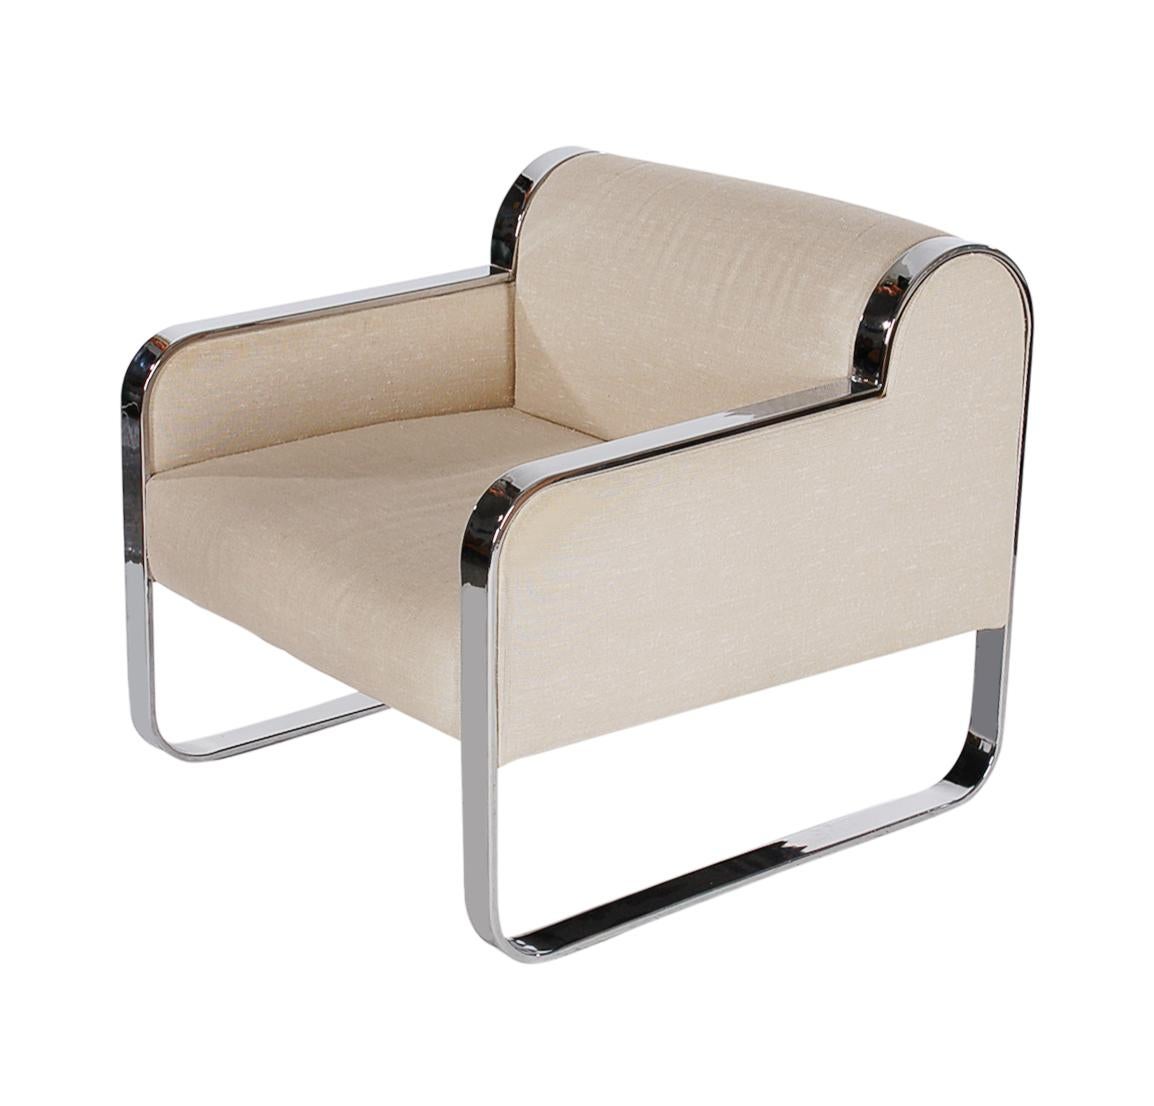 Late 20th Century Pair of White Mid-Century Modern Club Lounge Chairs After Milo Baughman